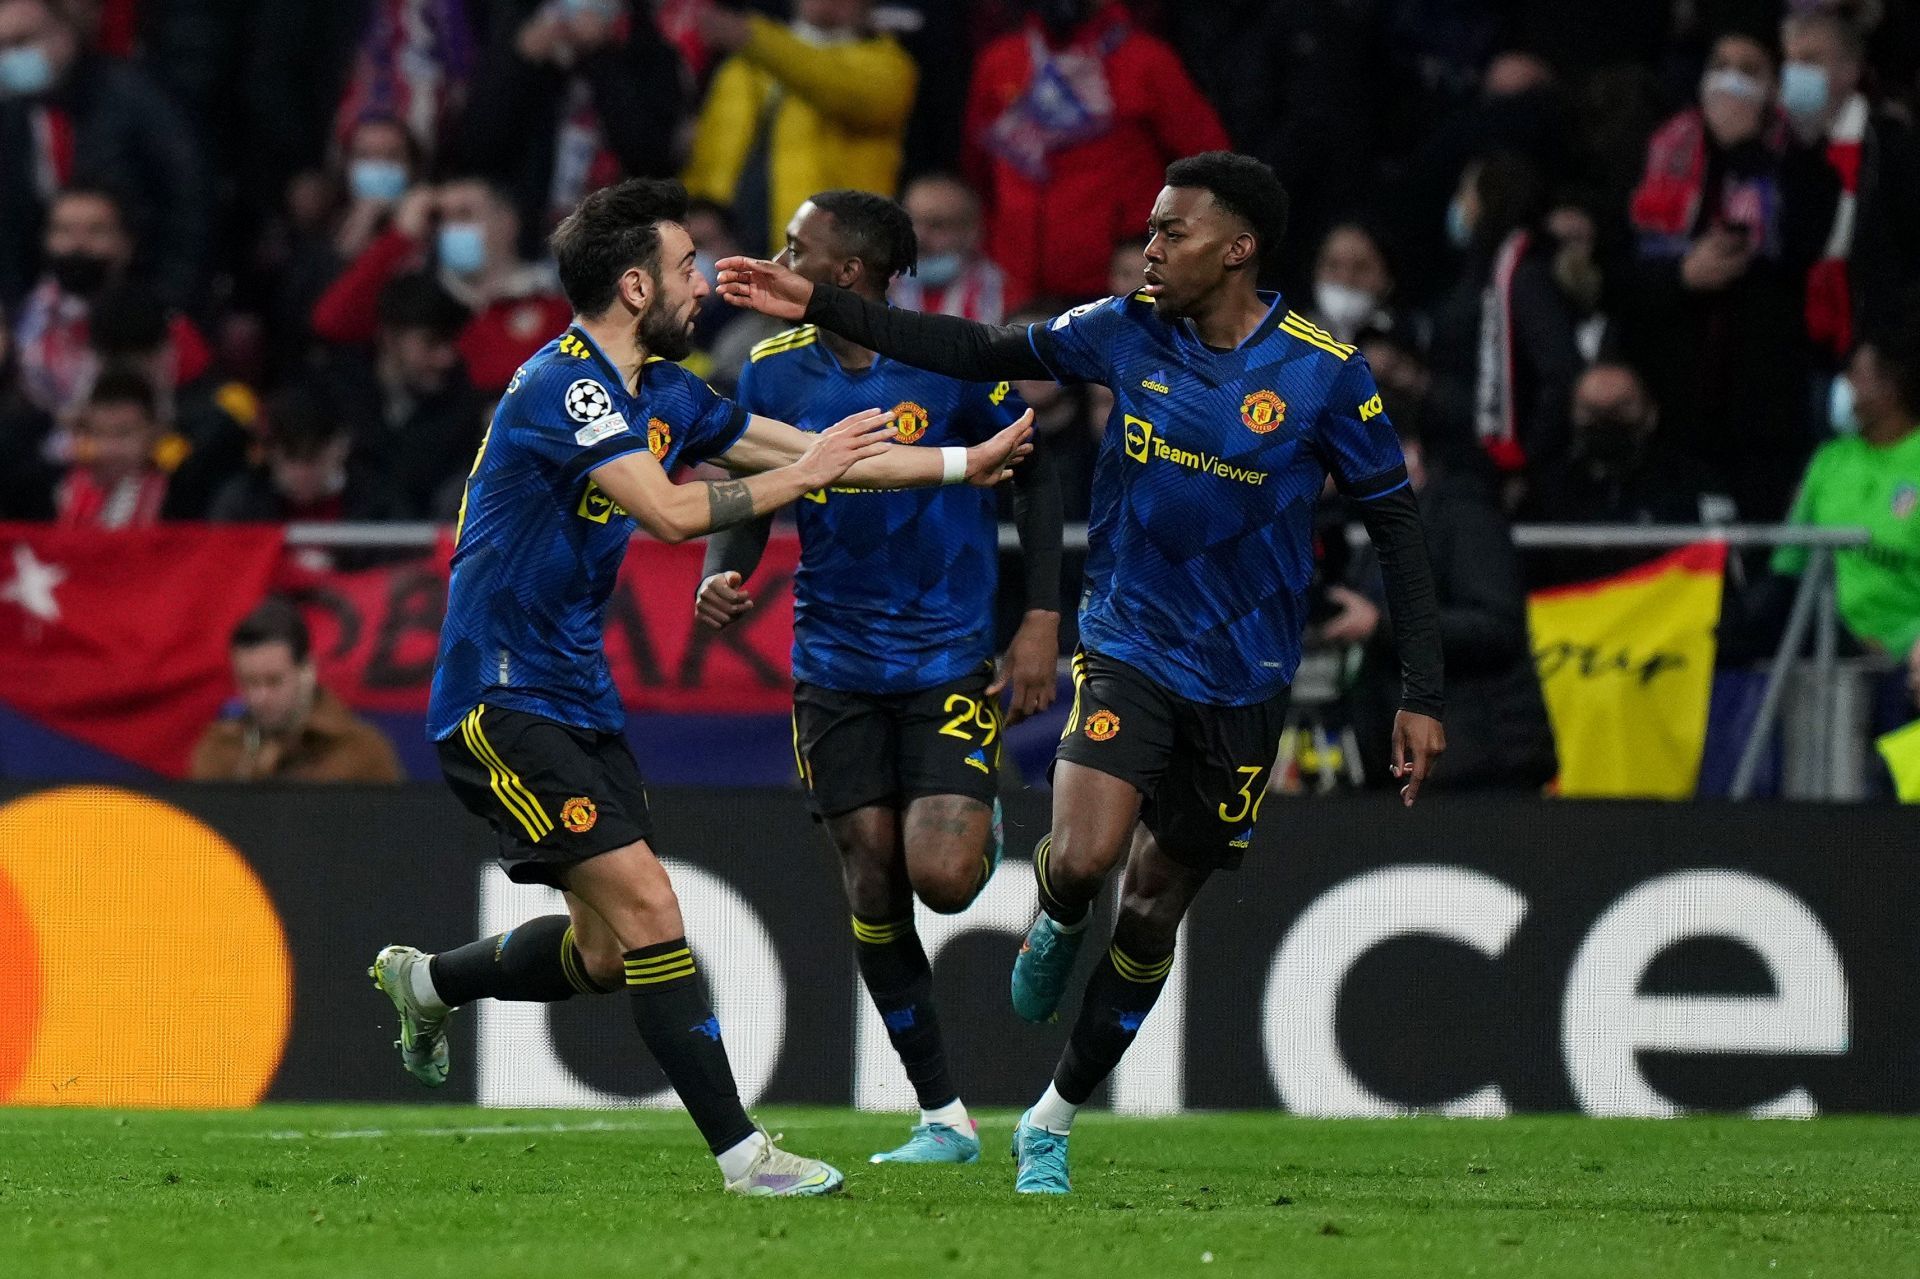 United held Atletico Madrid to a 1-1 draw in the Champions League.